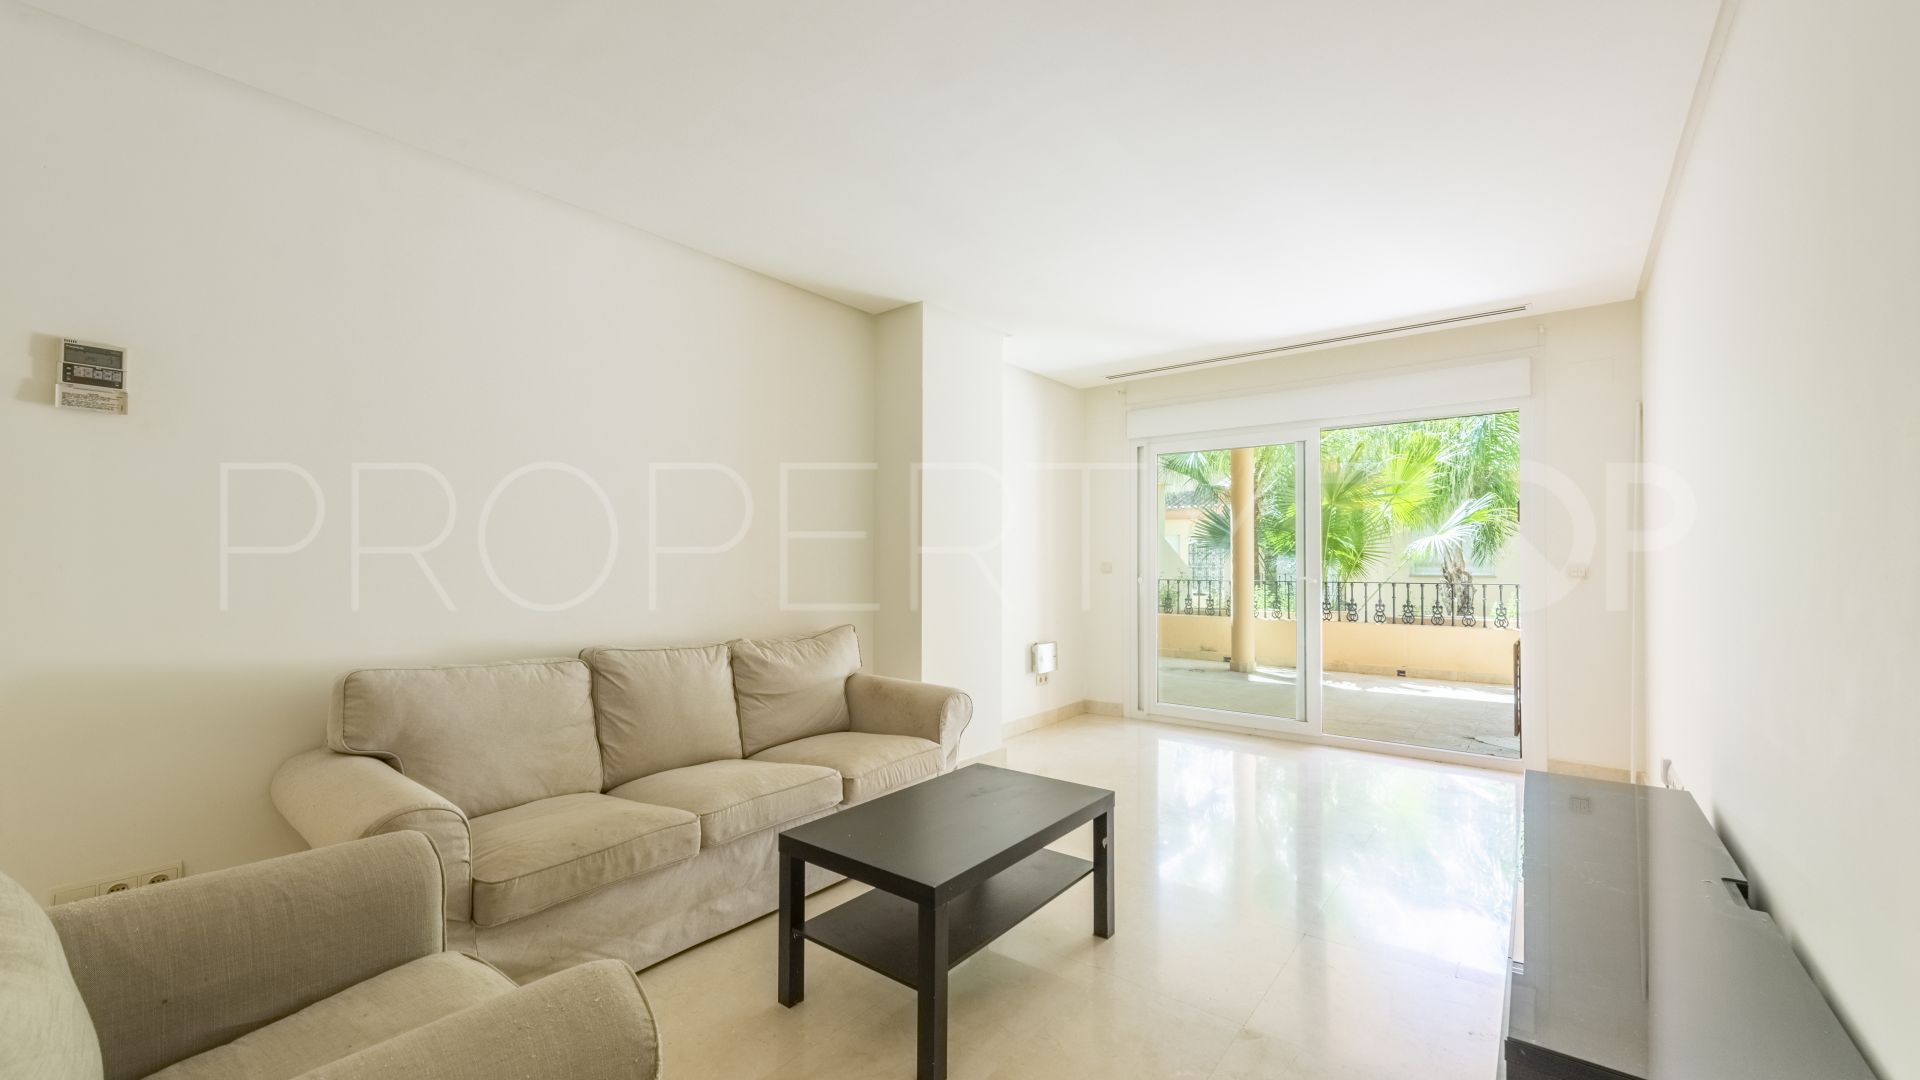 For sale ground floor apartment in Vista Real